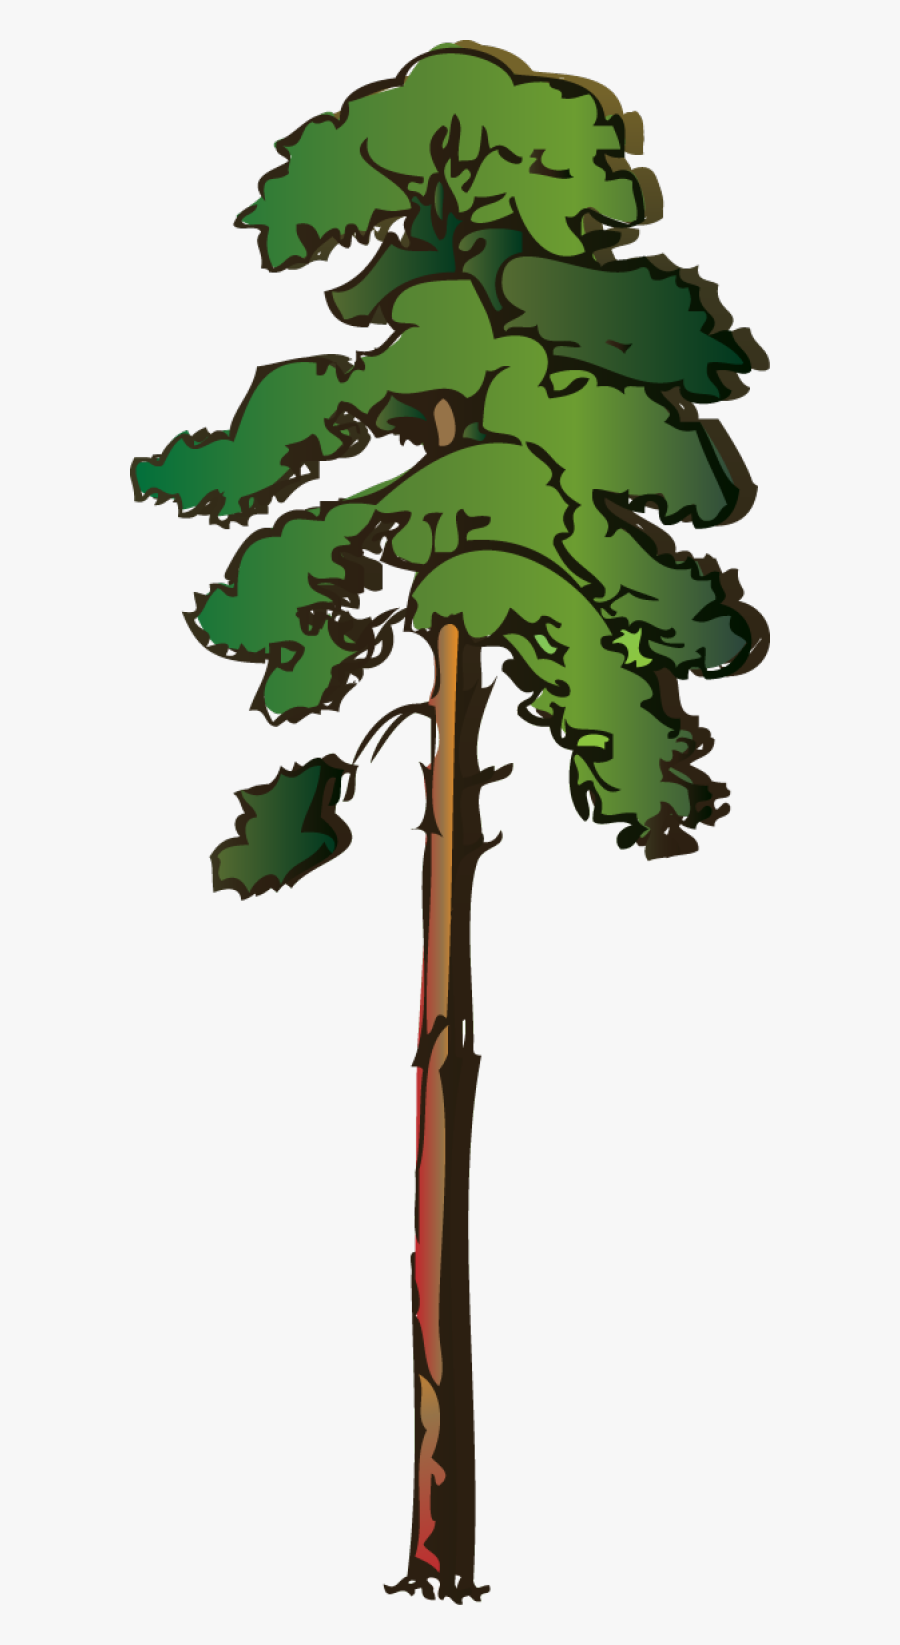 Forest Clipart Pine Tree - Redwood Tree Clipart, Transparent Clipart